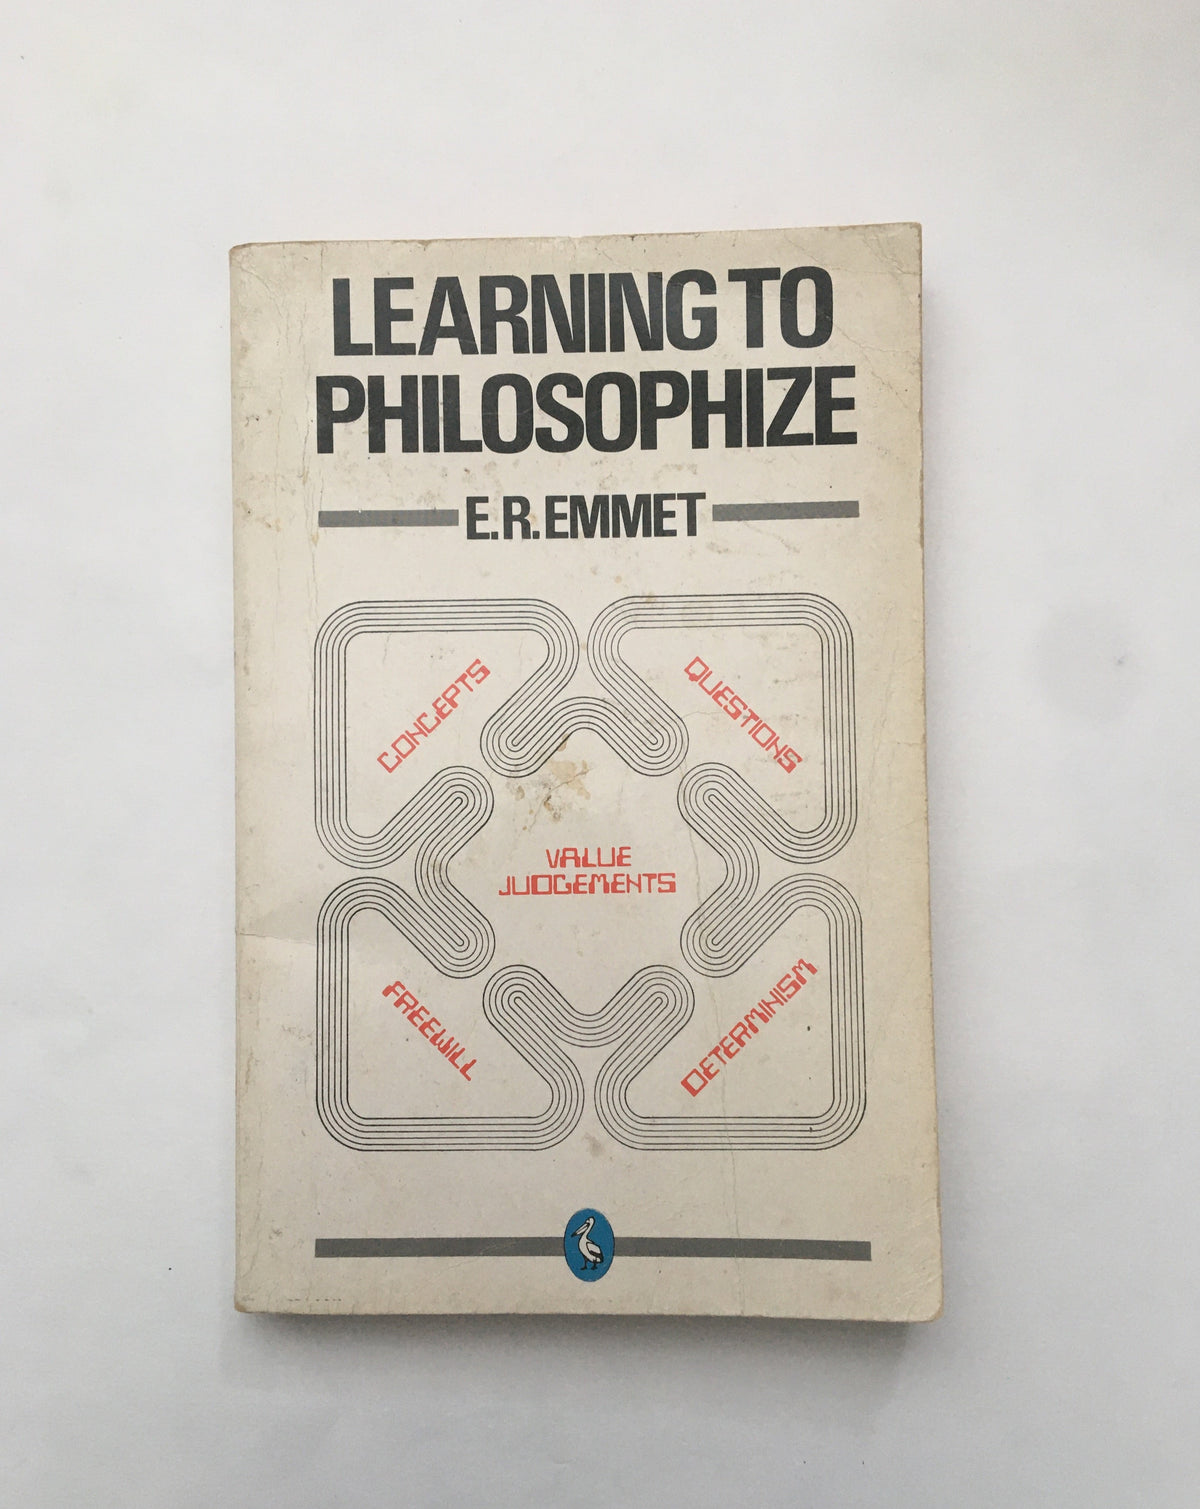 Learning to Philosophize by E.R. Emmet